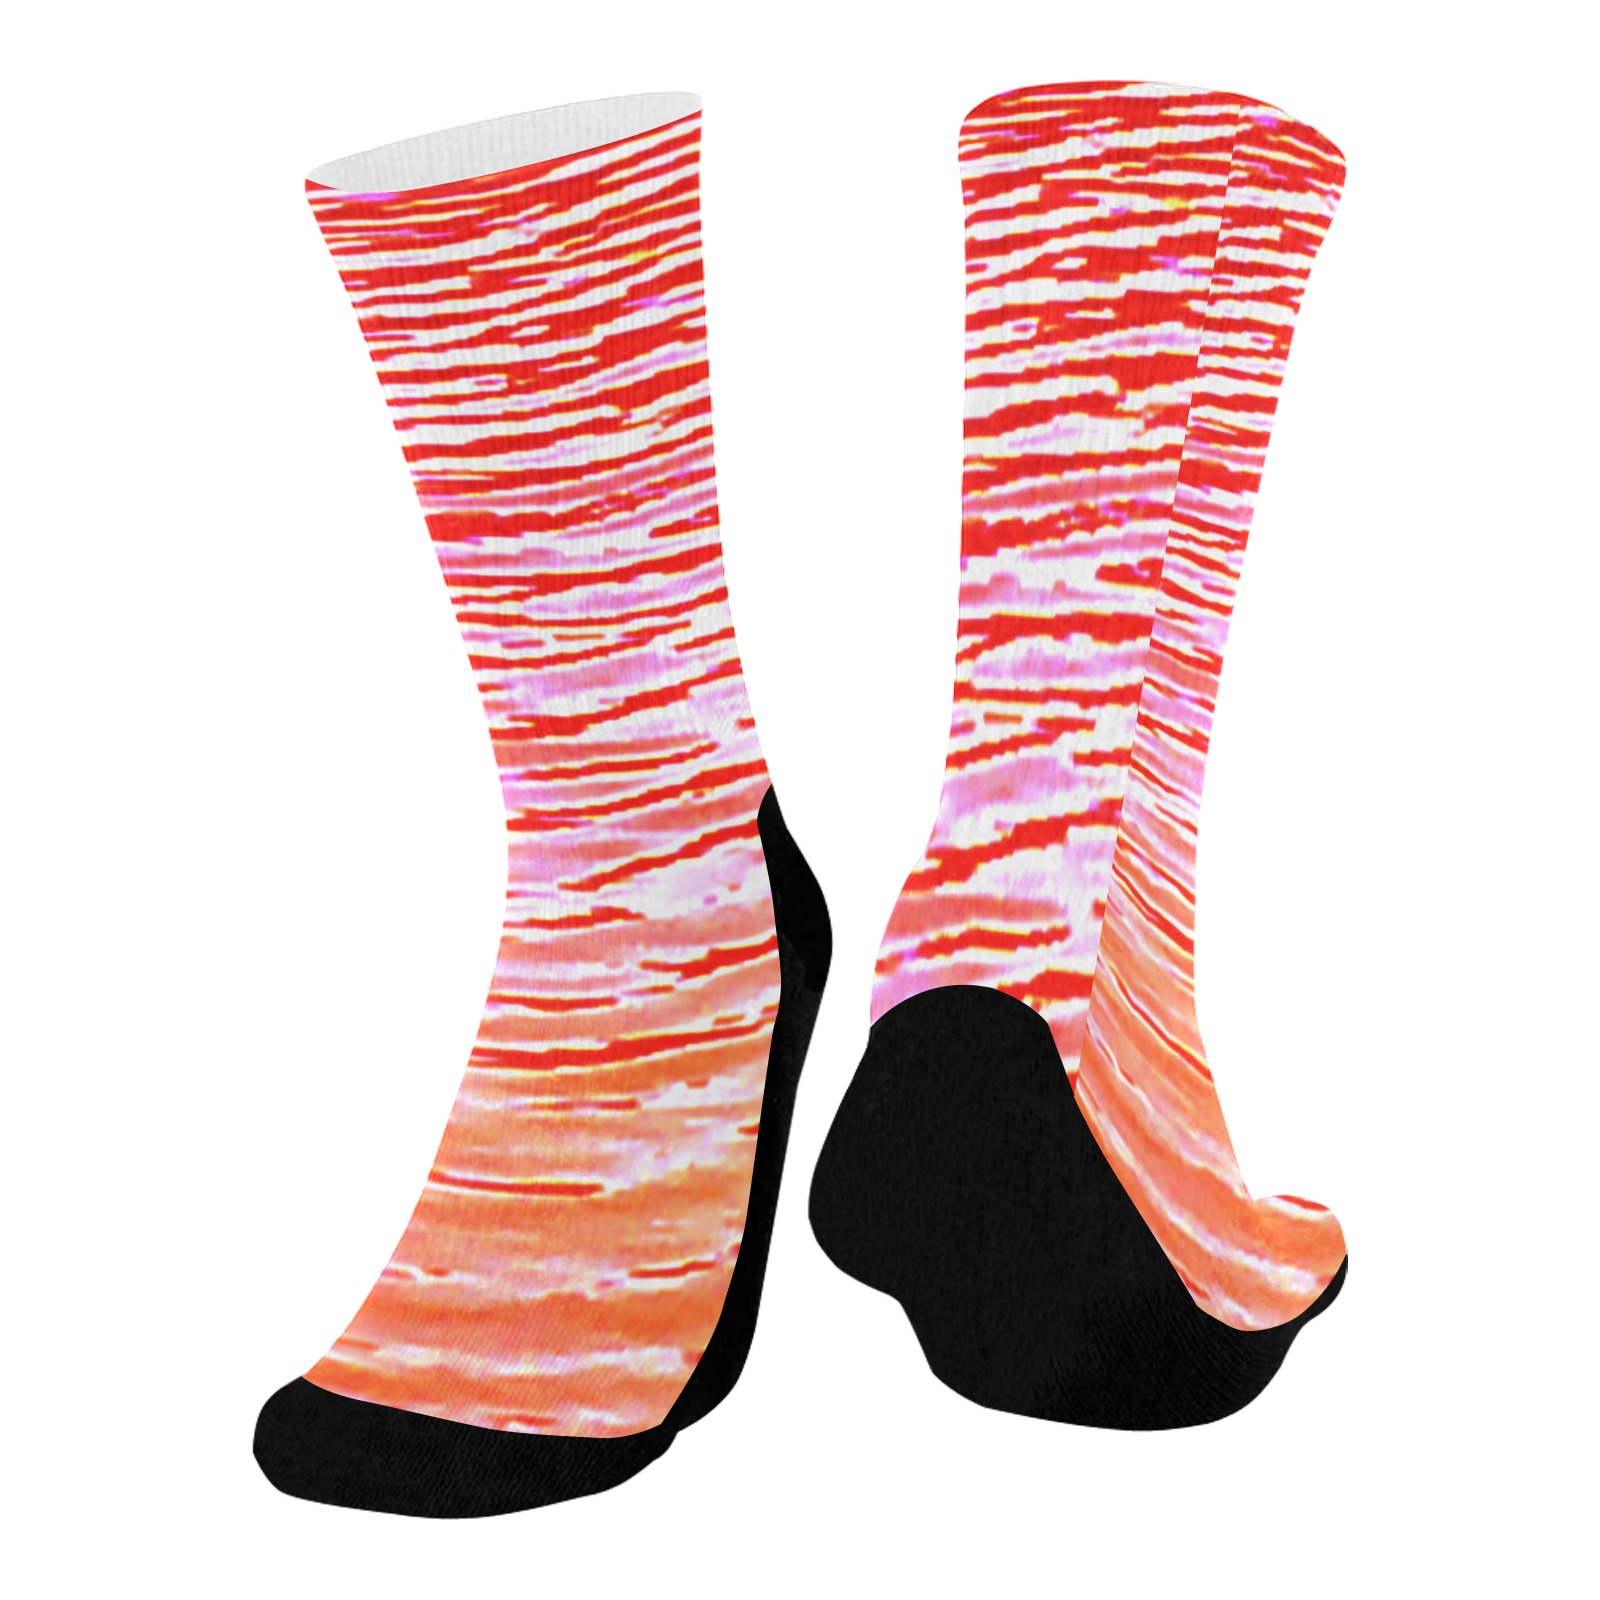 Orange and red water Mid-Calf Socks (Black Sole)